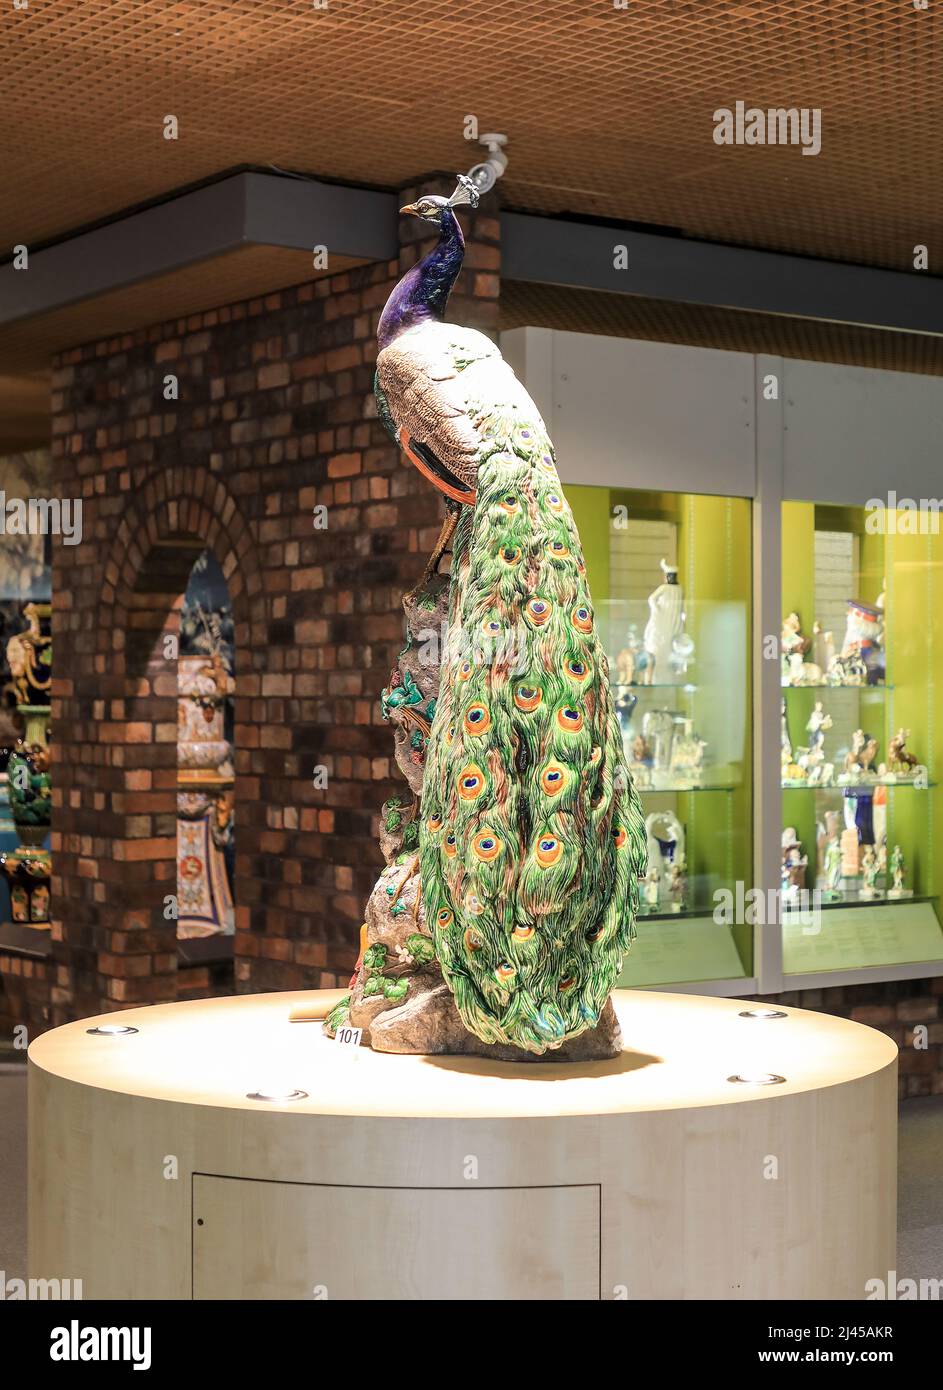 A Minton majolica life sized model of a peacock, modelled by Paul Comolera on display at the Potteries Museum, Hanley, Stoke-on-Trent, Staffs, England Stock Photo